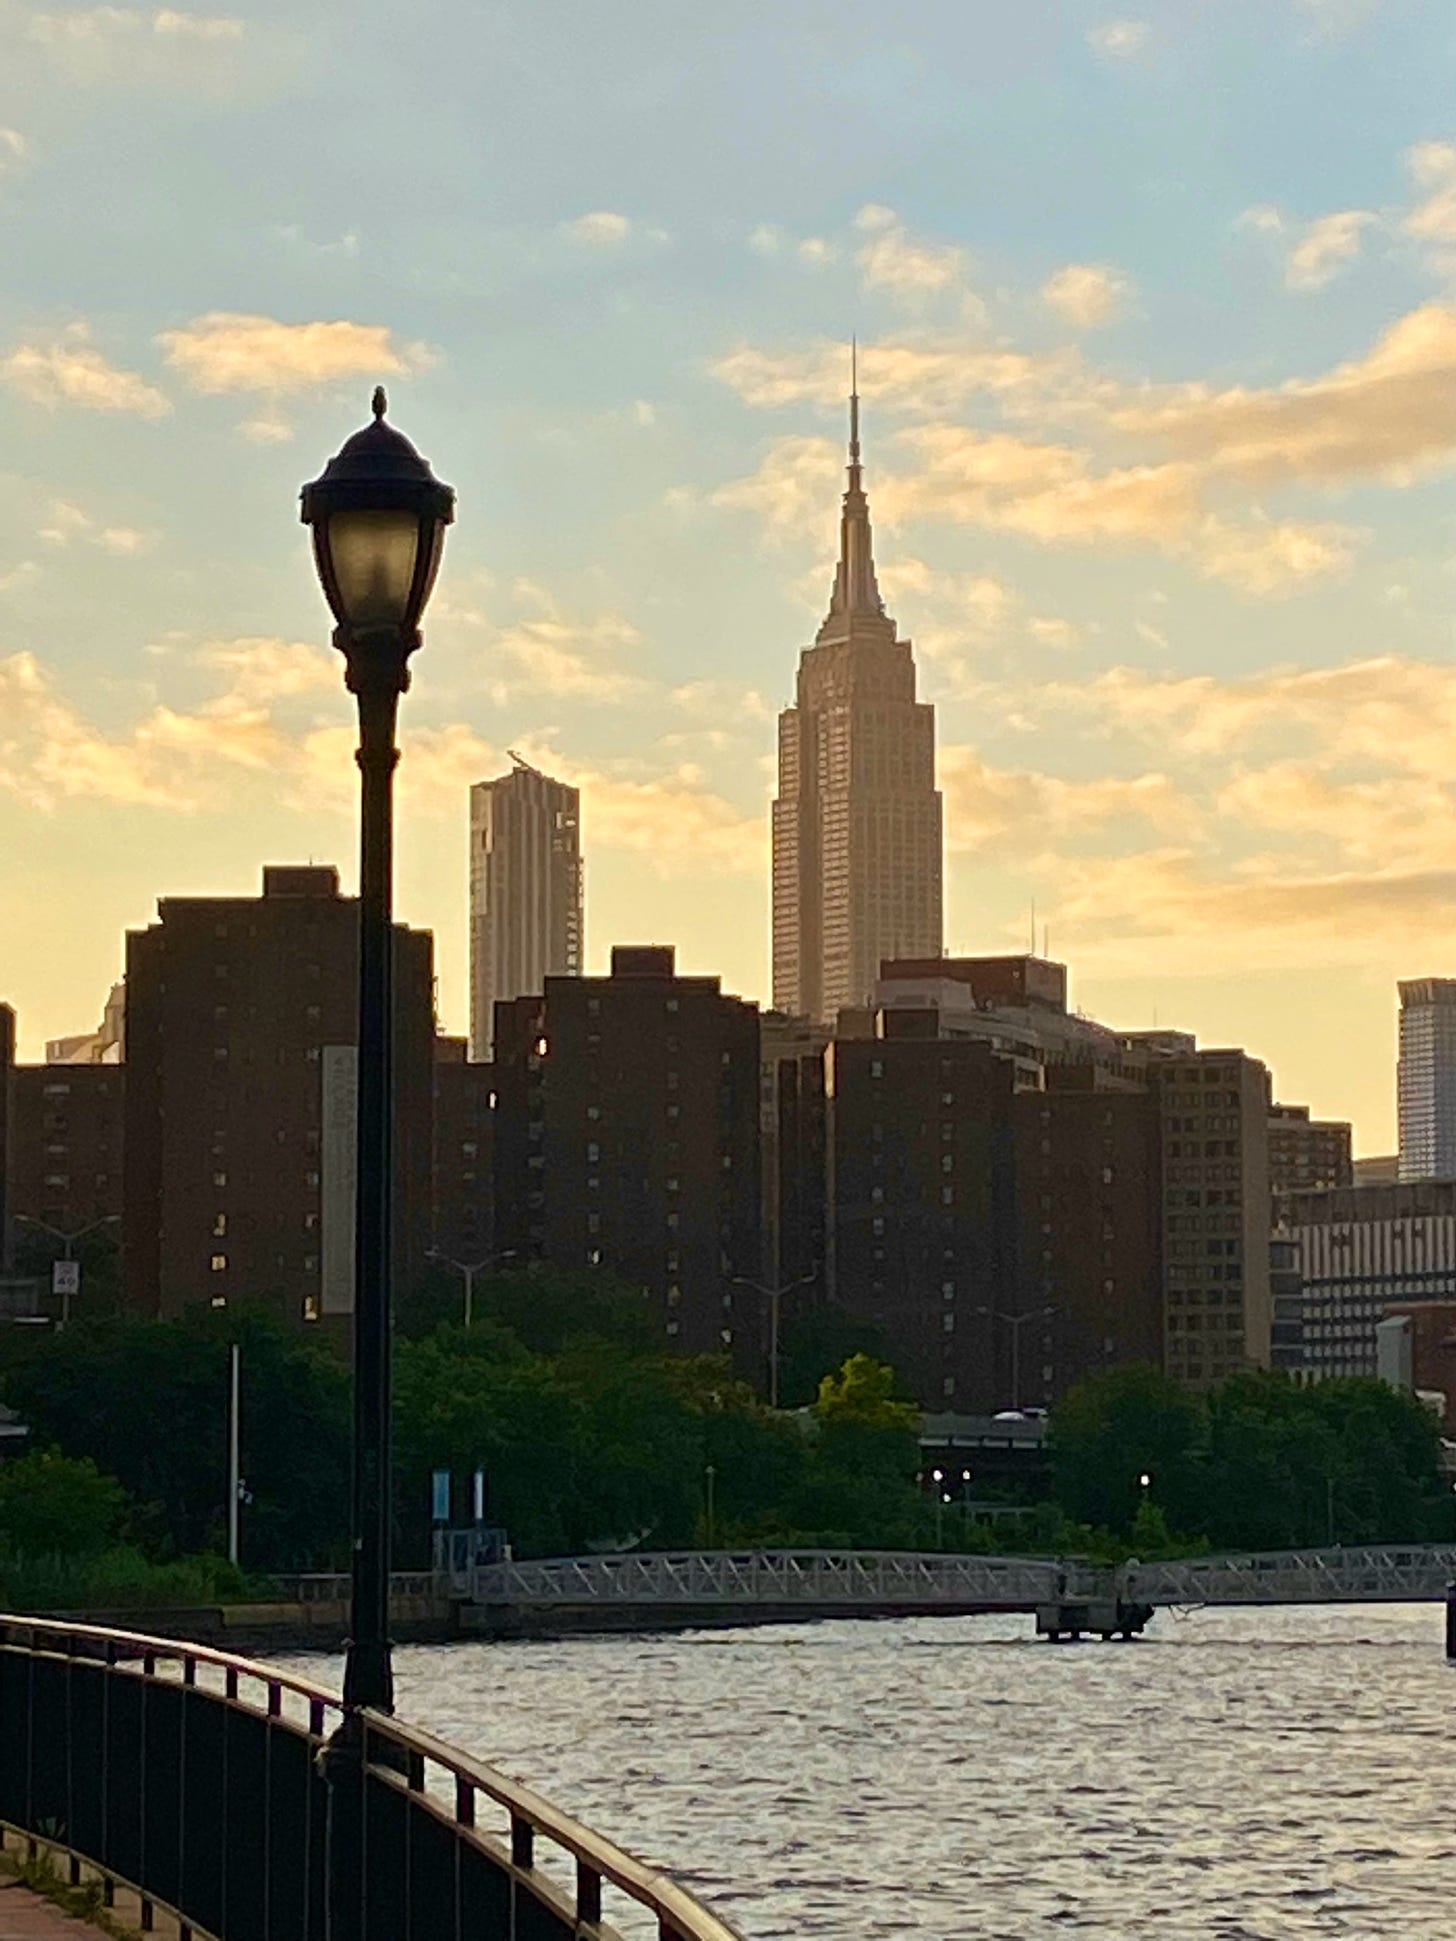 The Empire State Building seen from the East River. The sky is pale blue with glowing clouds. In the foreground is a black lamppost.